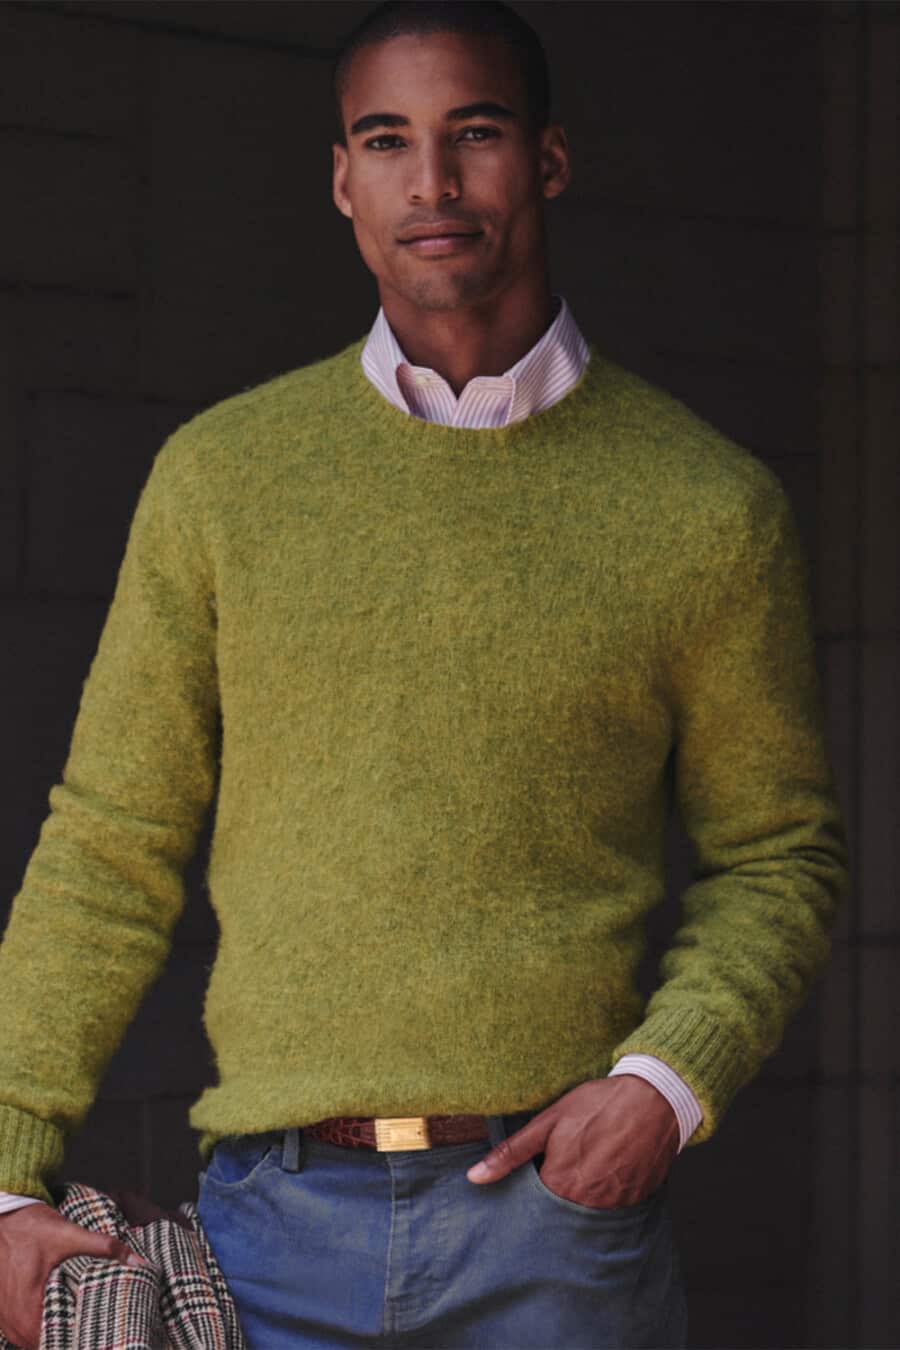 Man wearing blue jeans with a pink stripe shirt and green textured sweater